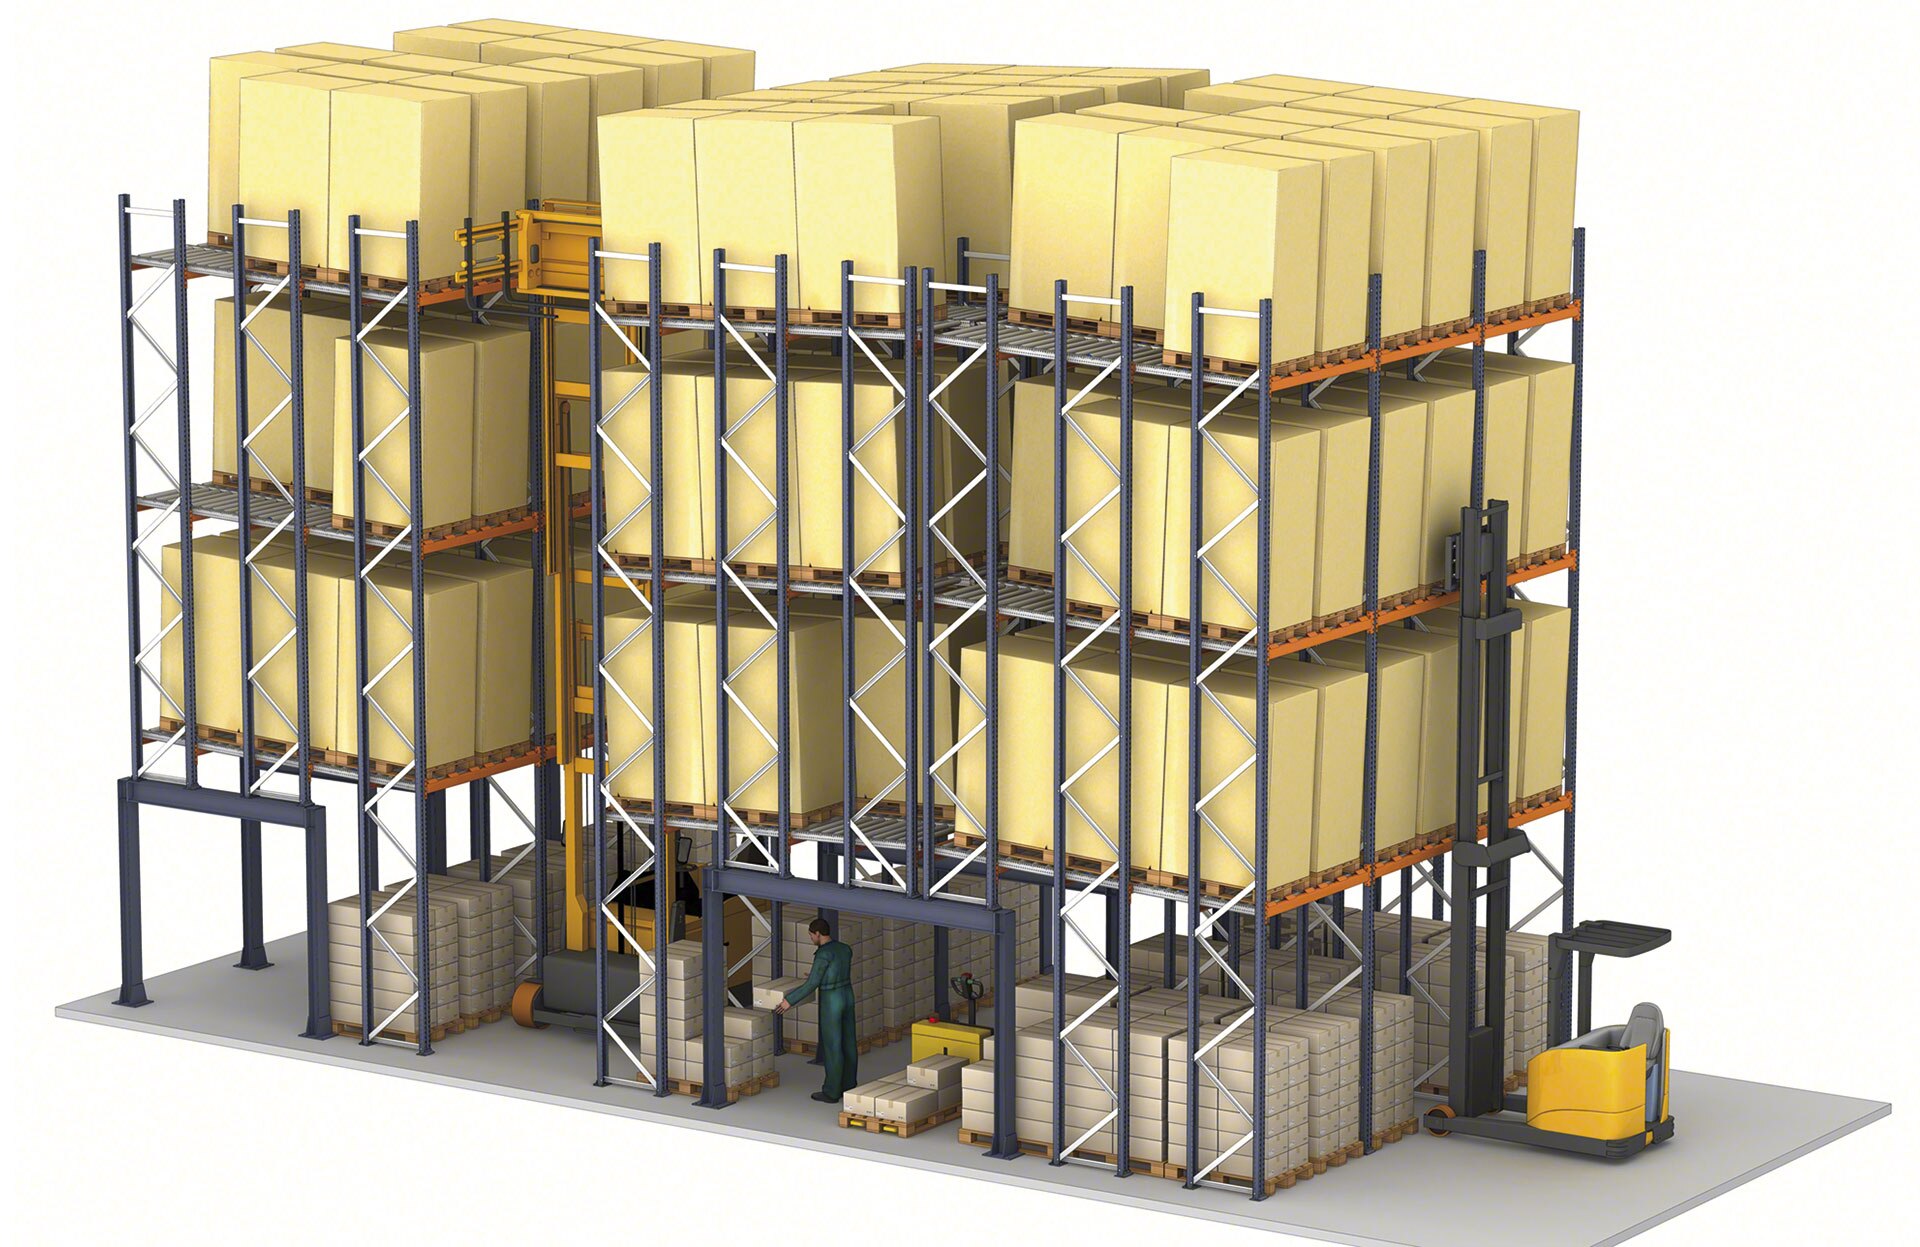 The push-back rack can be combined with lower levels to pick from pallets